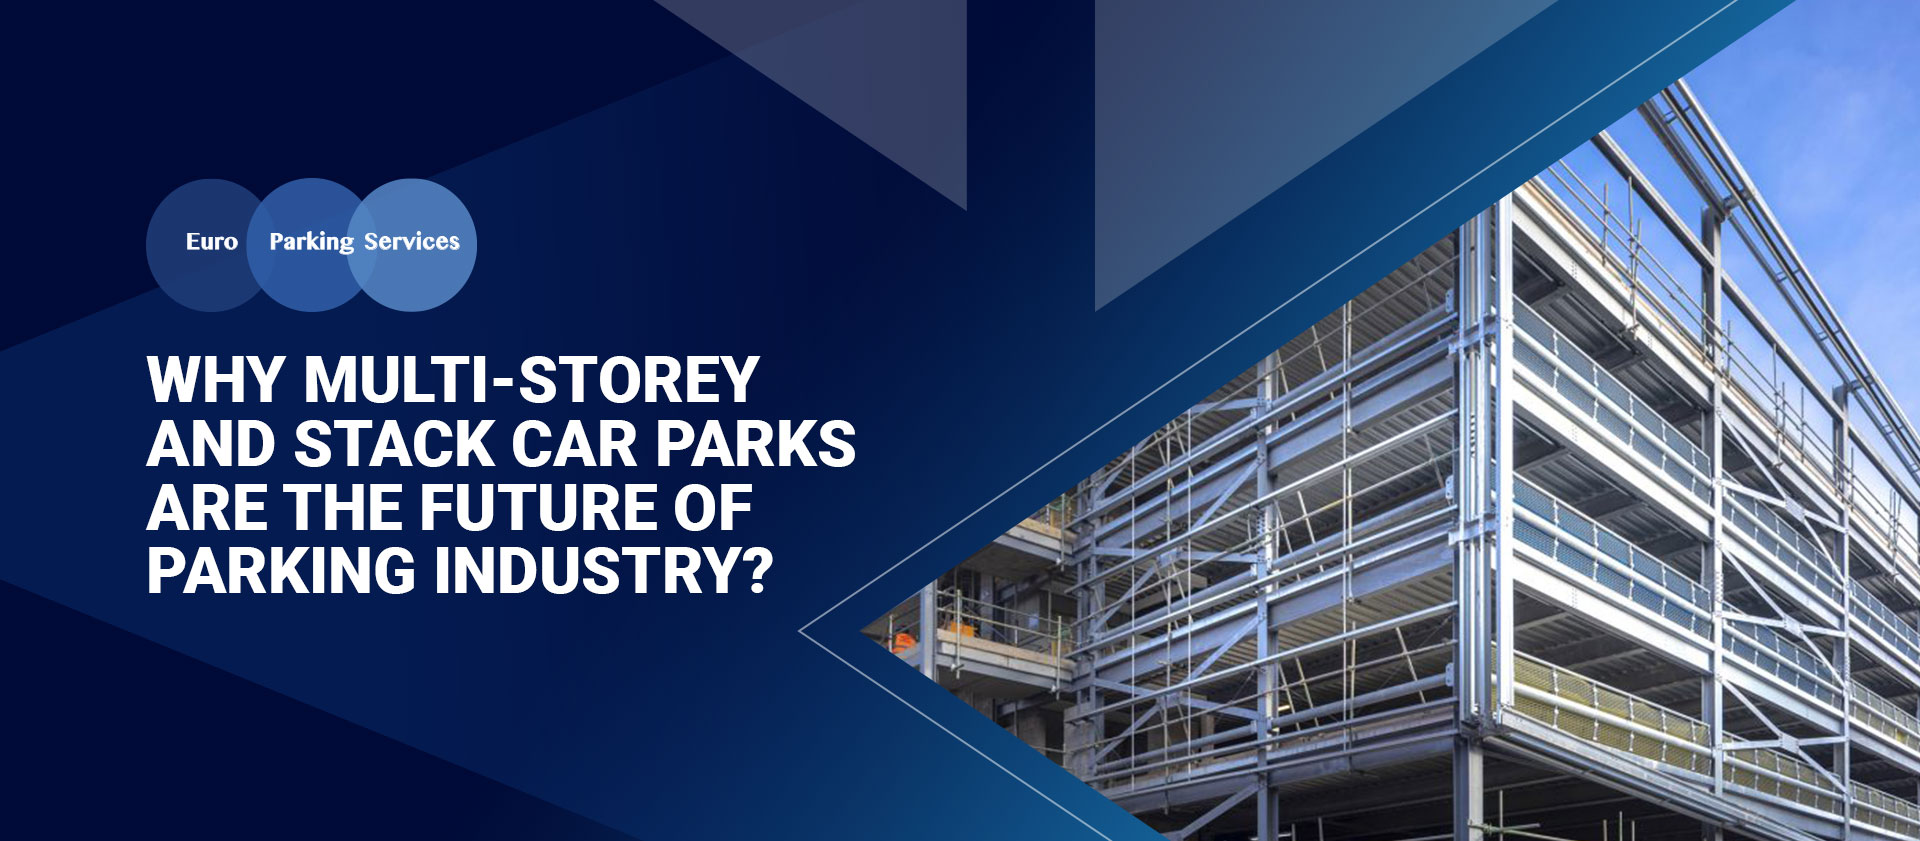 Multi-Storey & Stack Car Parks the Future of Parking Industry